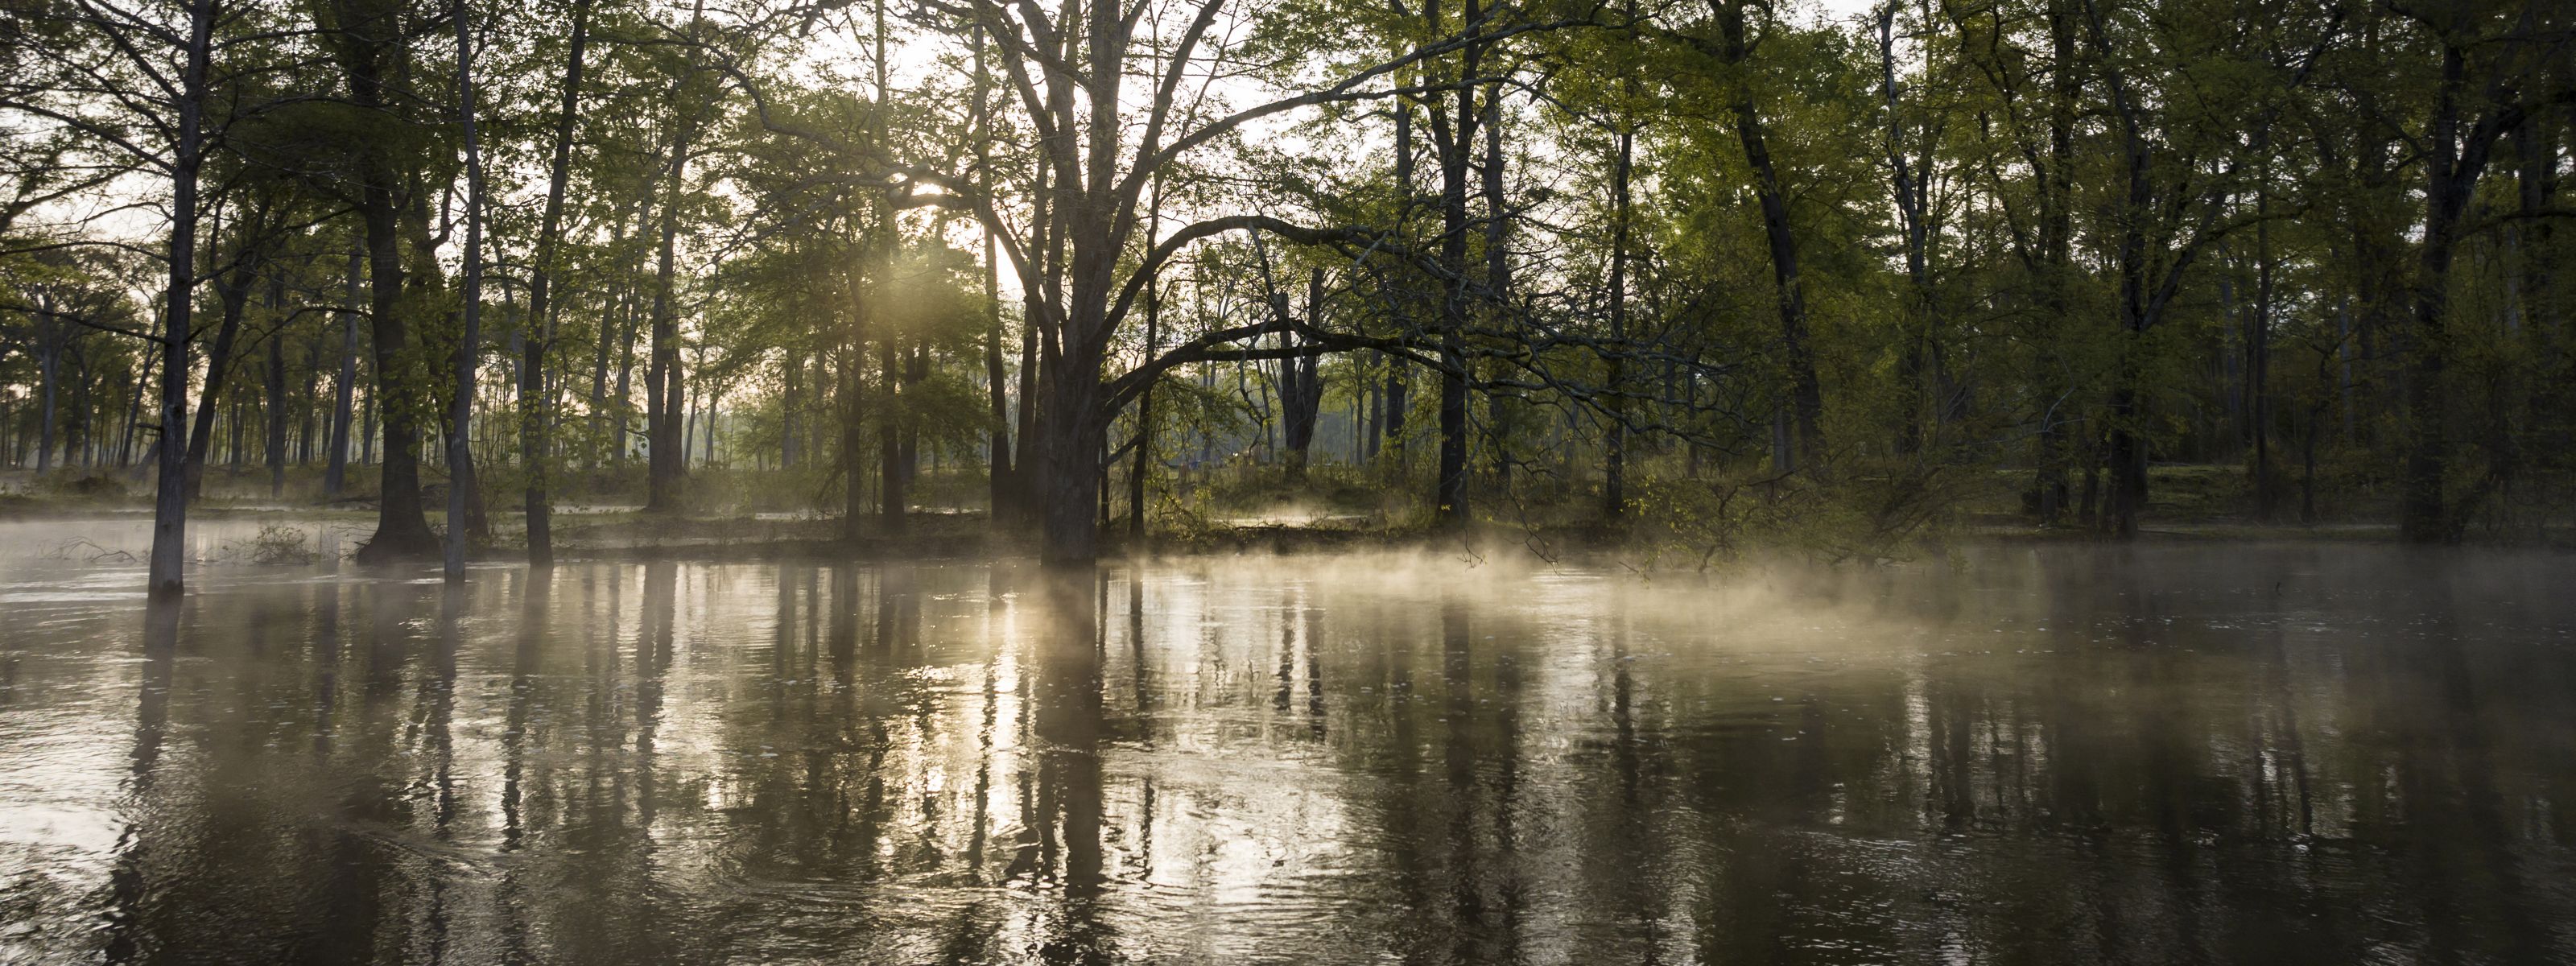 Mist rises on bottomland hardwood forest and shallow bald cypress swampland.